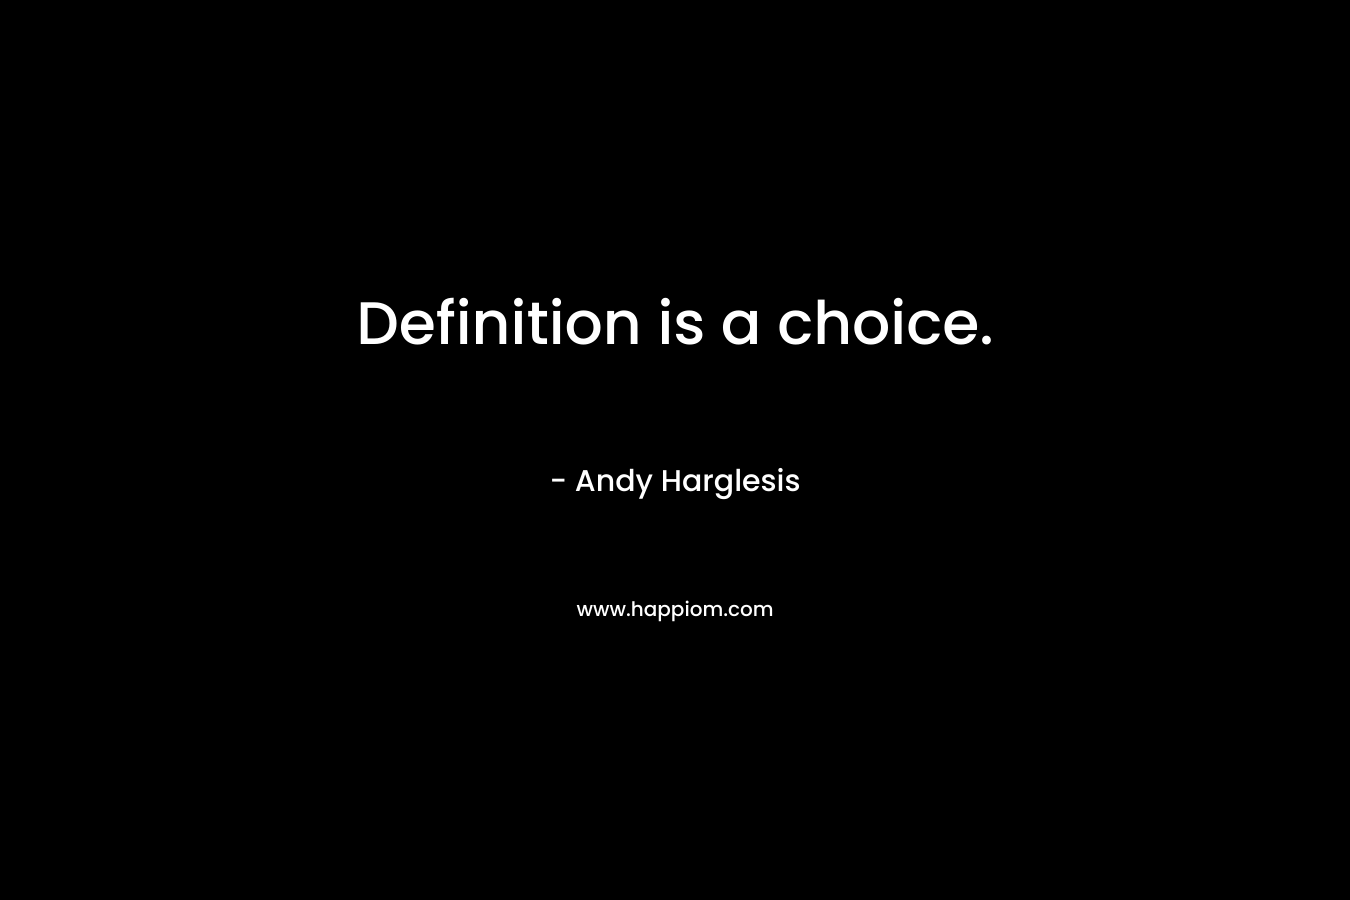 Definition is a choice. – Andy Harglesis